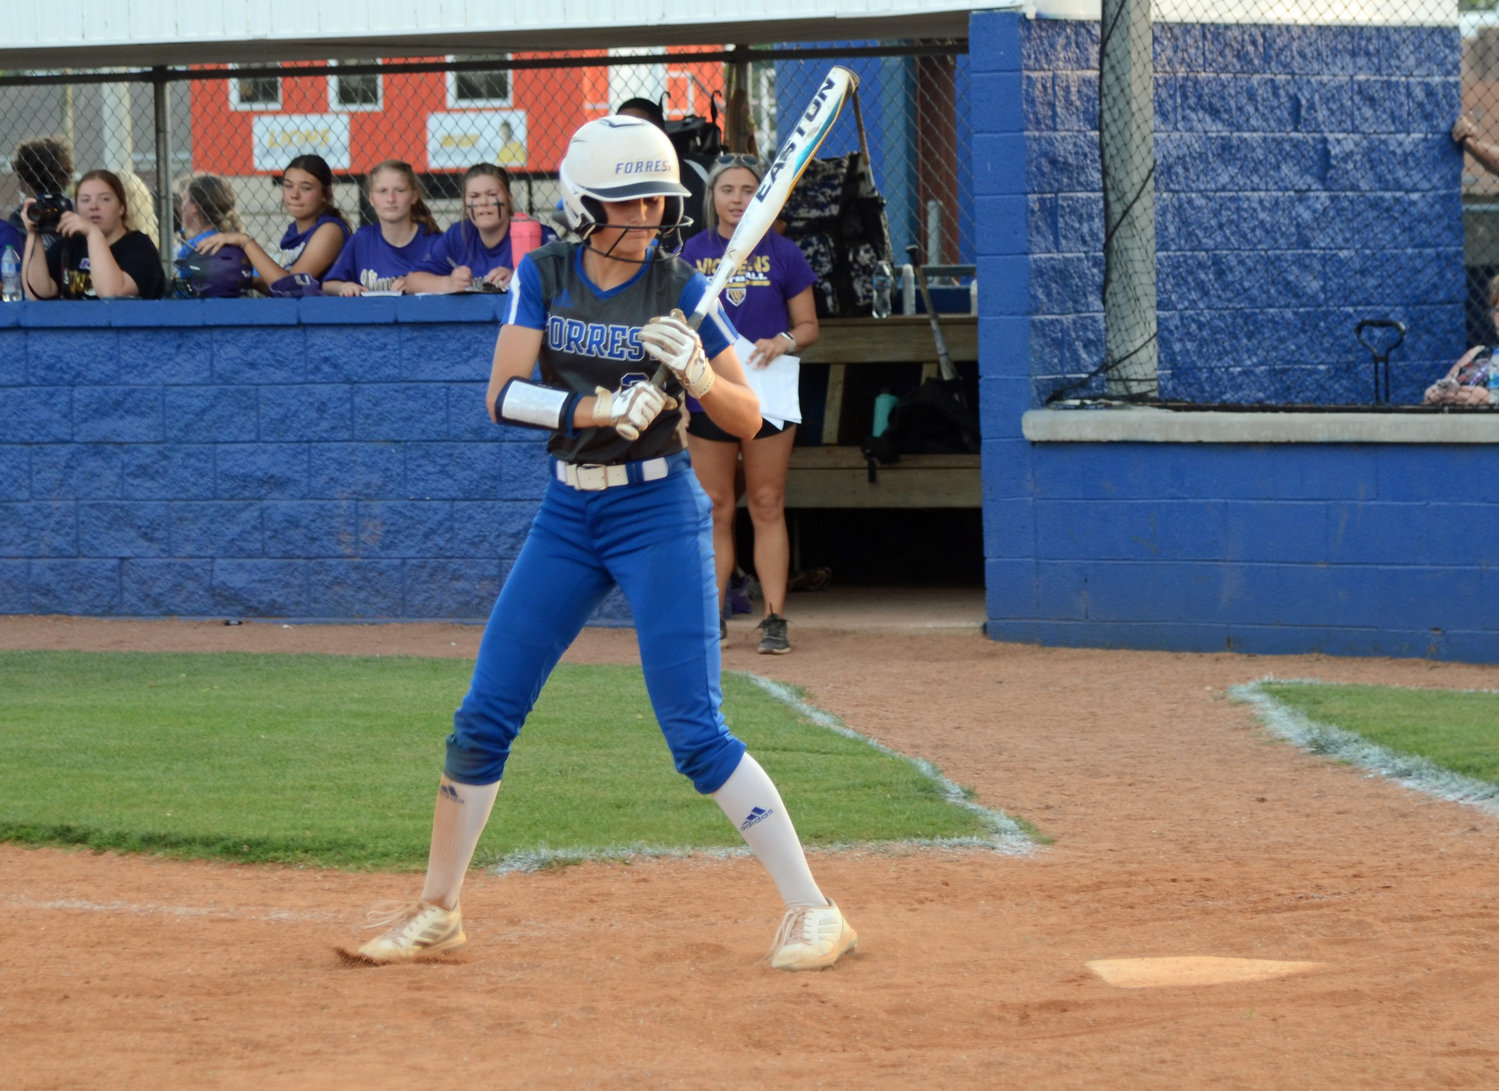 Maggie Daughrity had a productive game at the plate and turned in her usual outstanding performance in right field for Forrest.